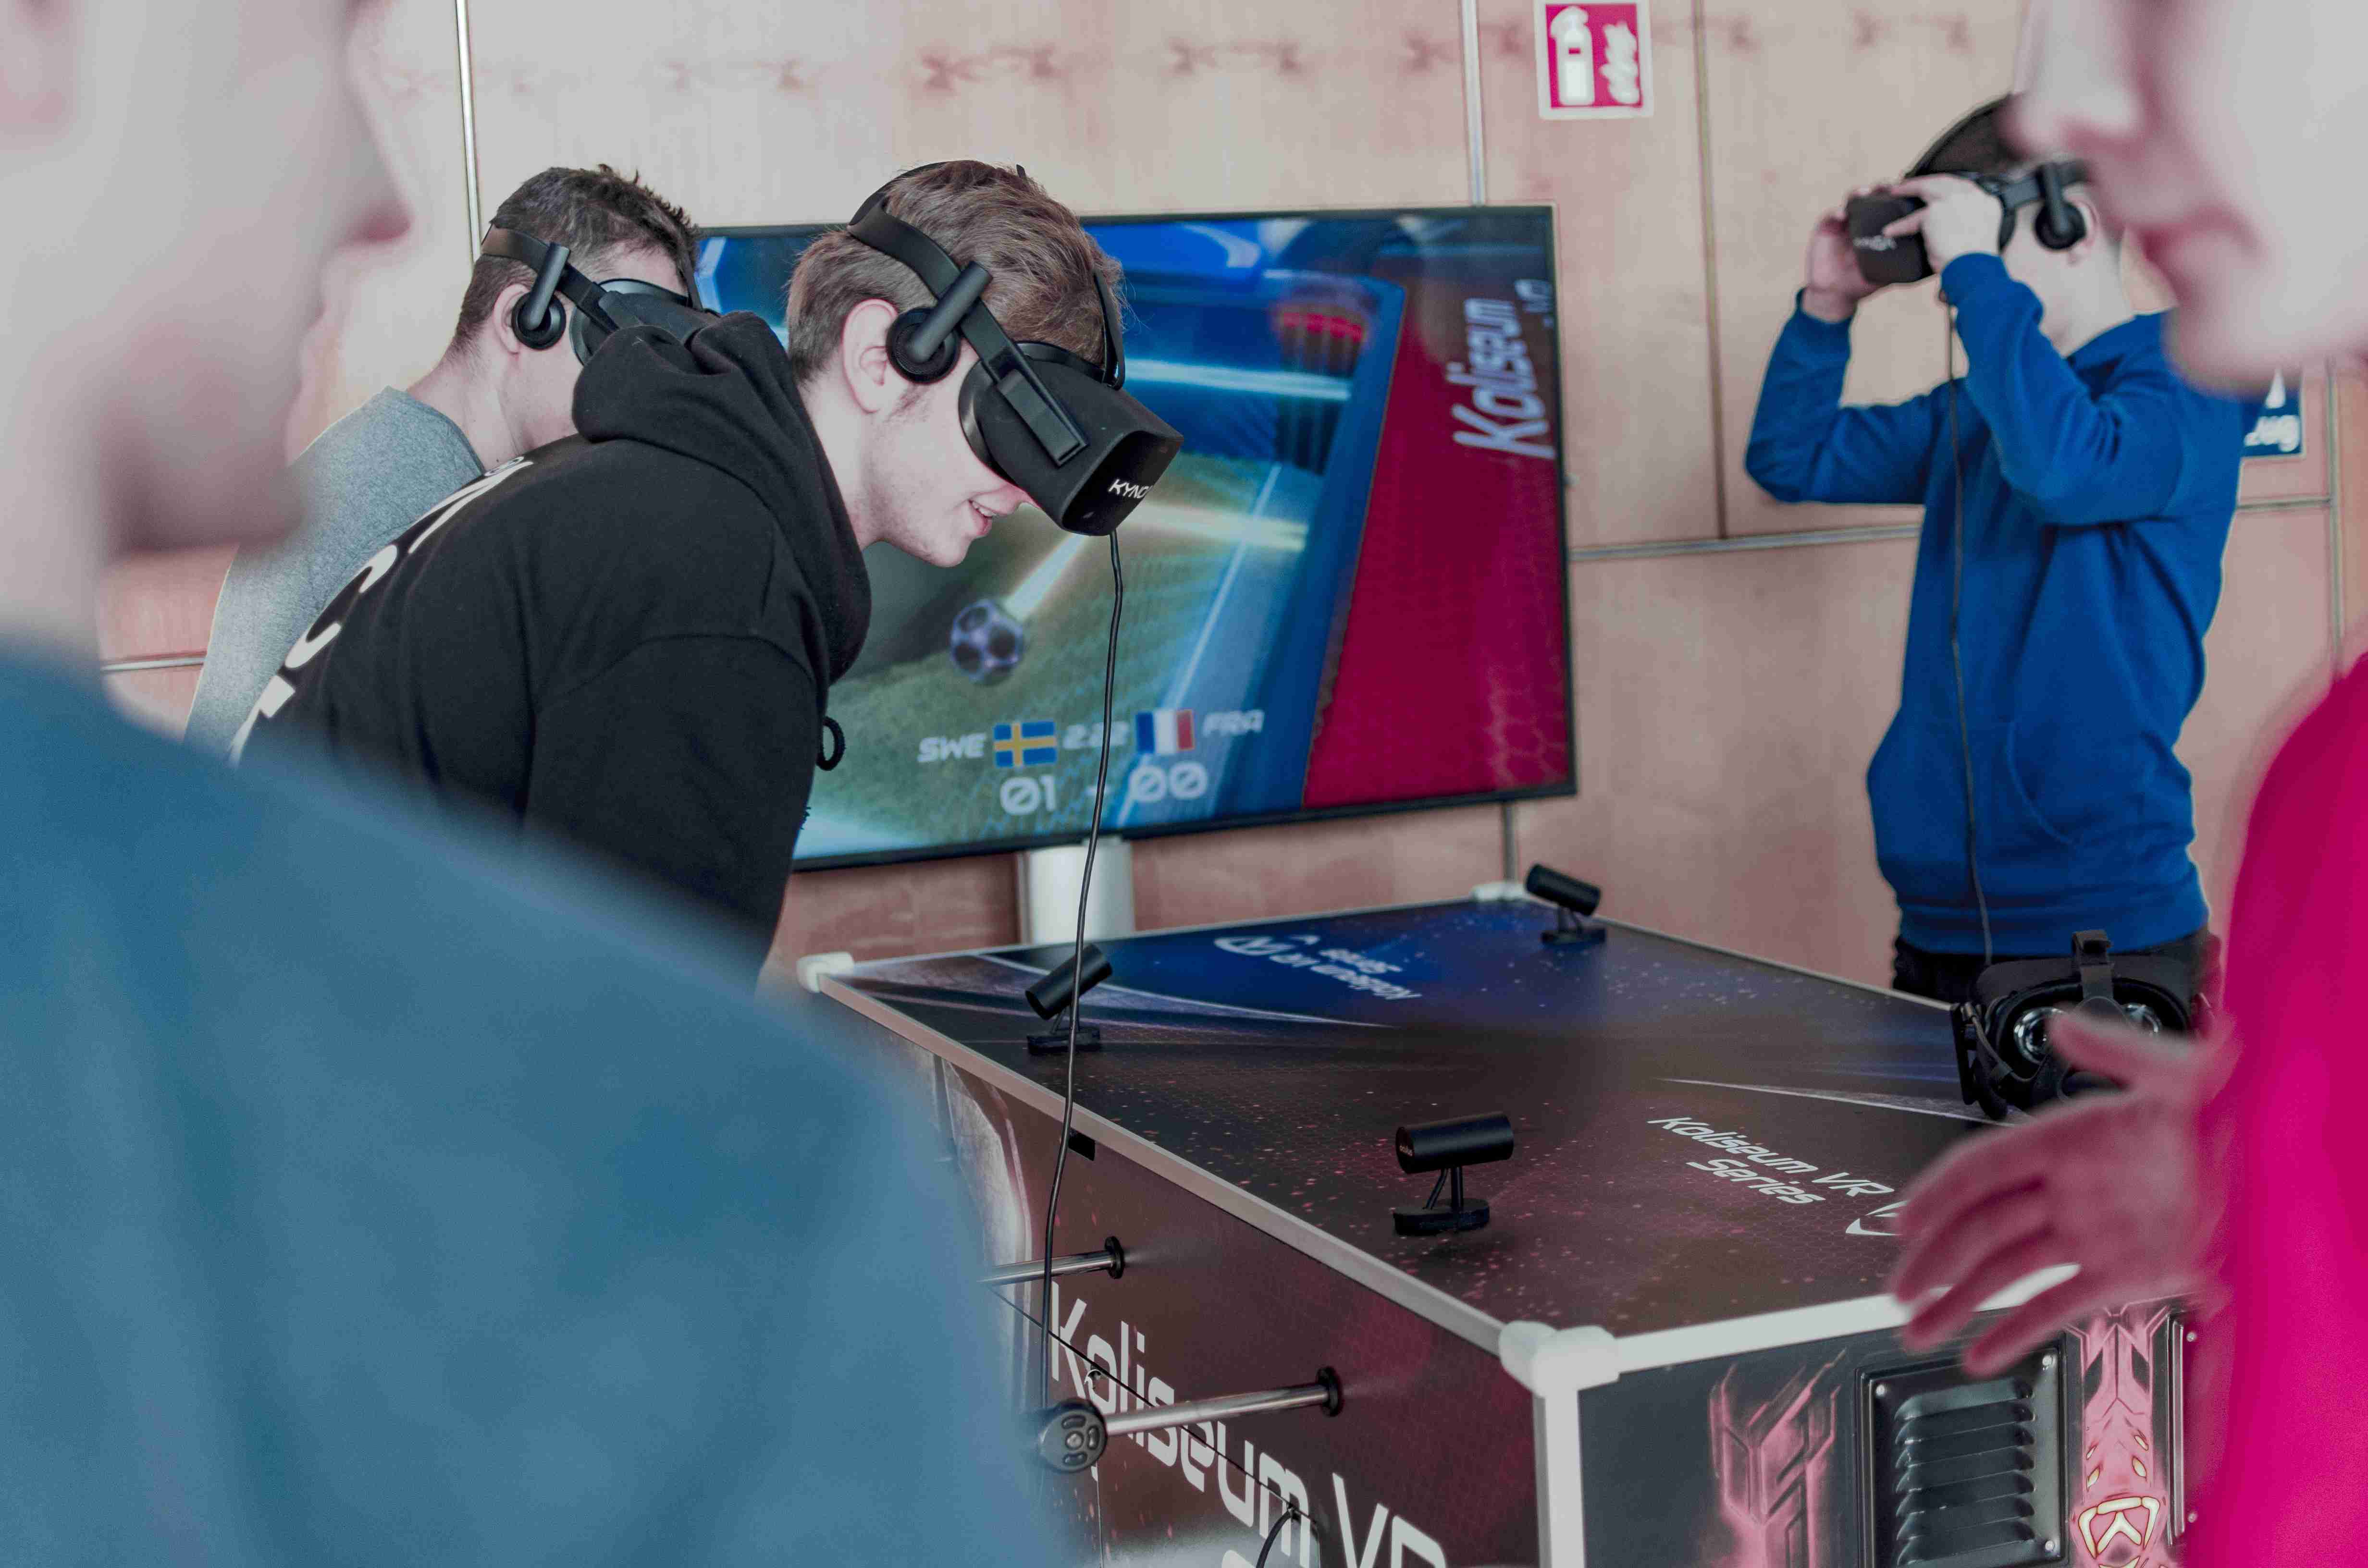 Several people operating a foosball table while wearing VR glasses